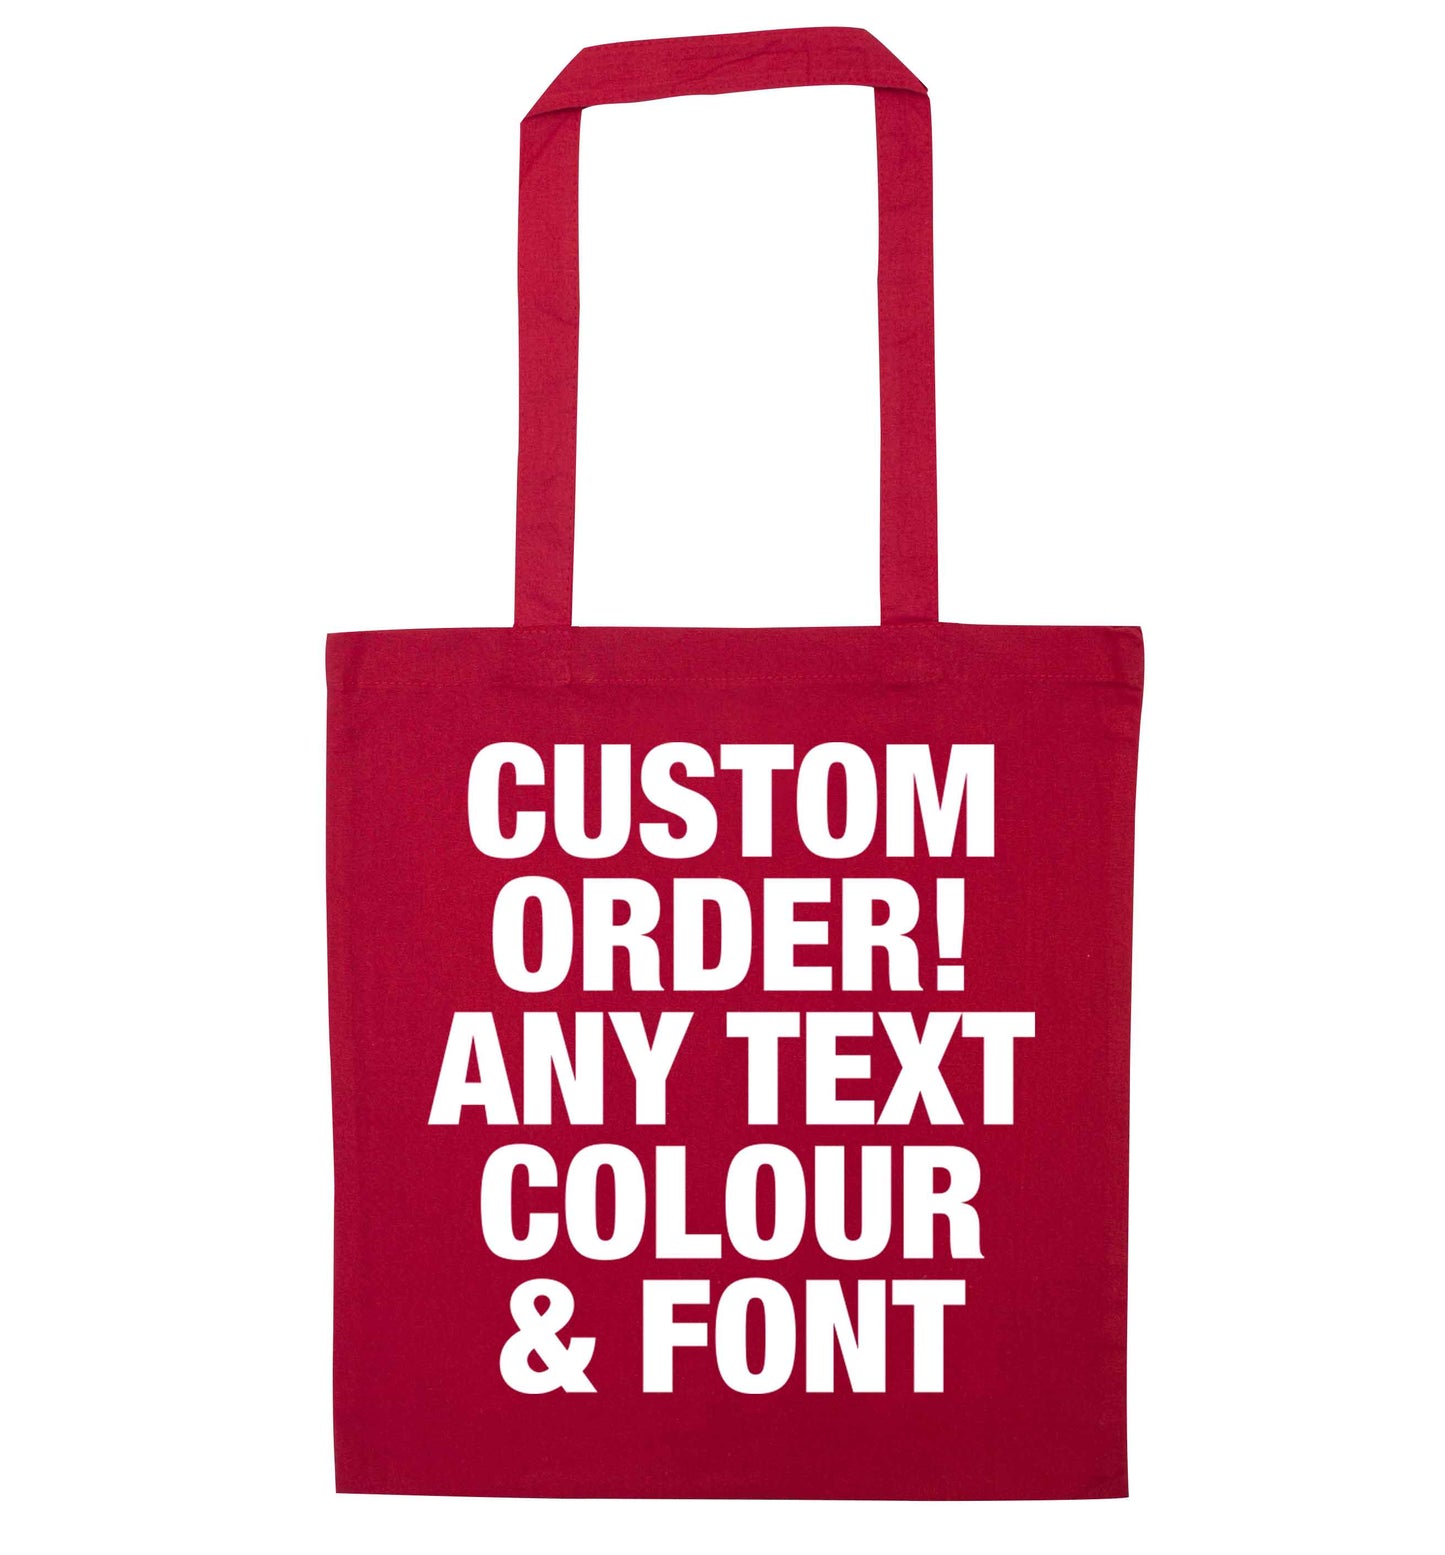 Custom order any text colour and font red tote bag